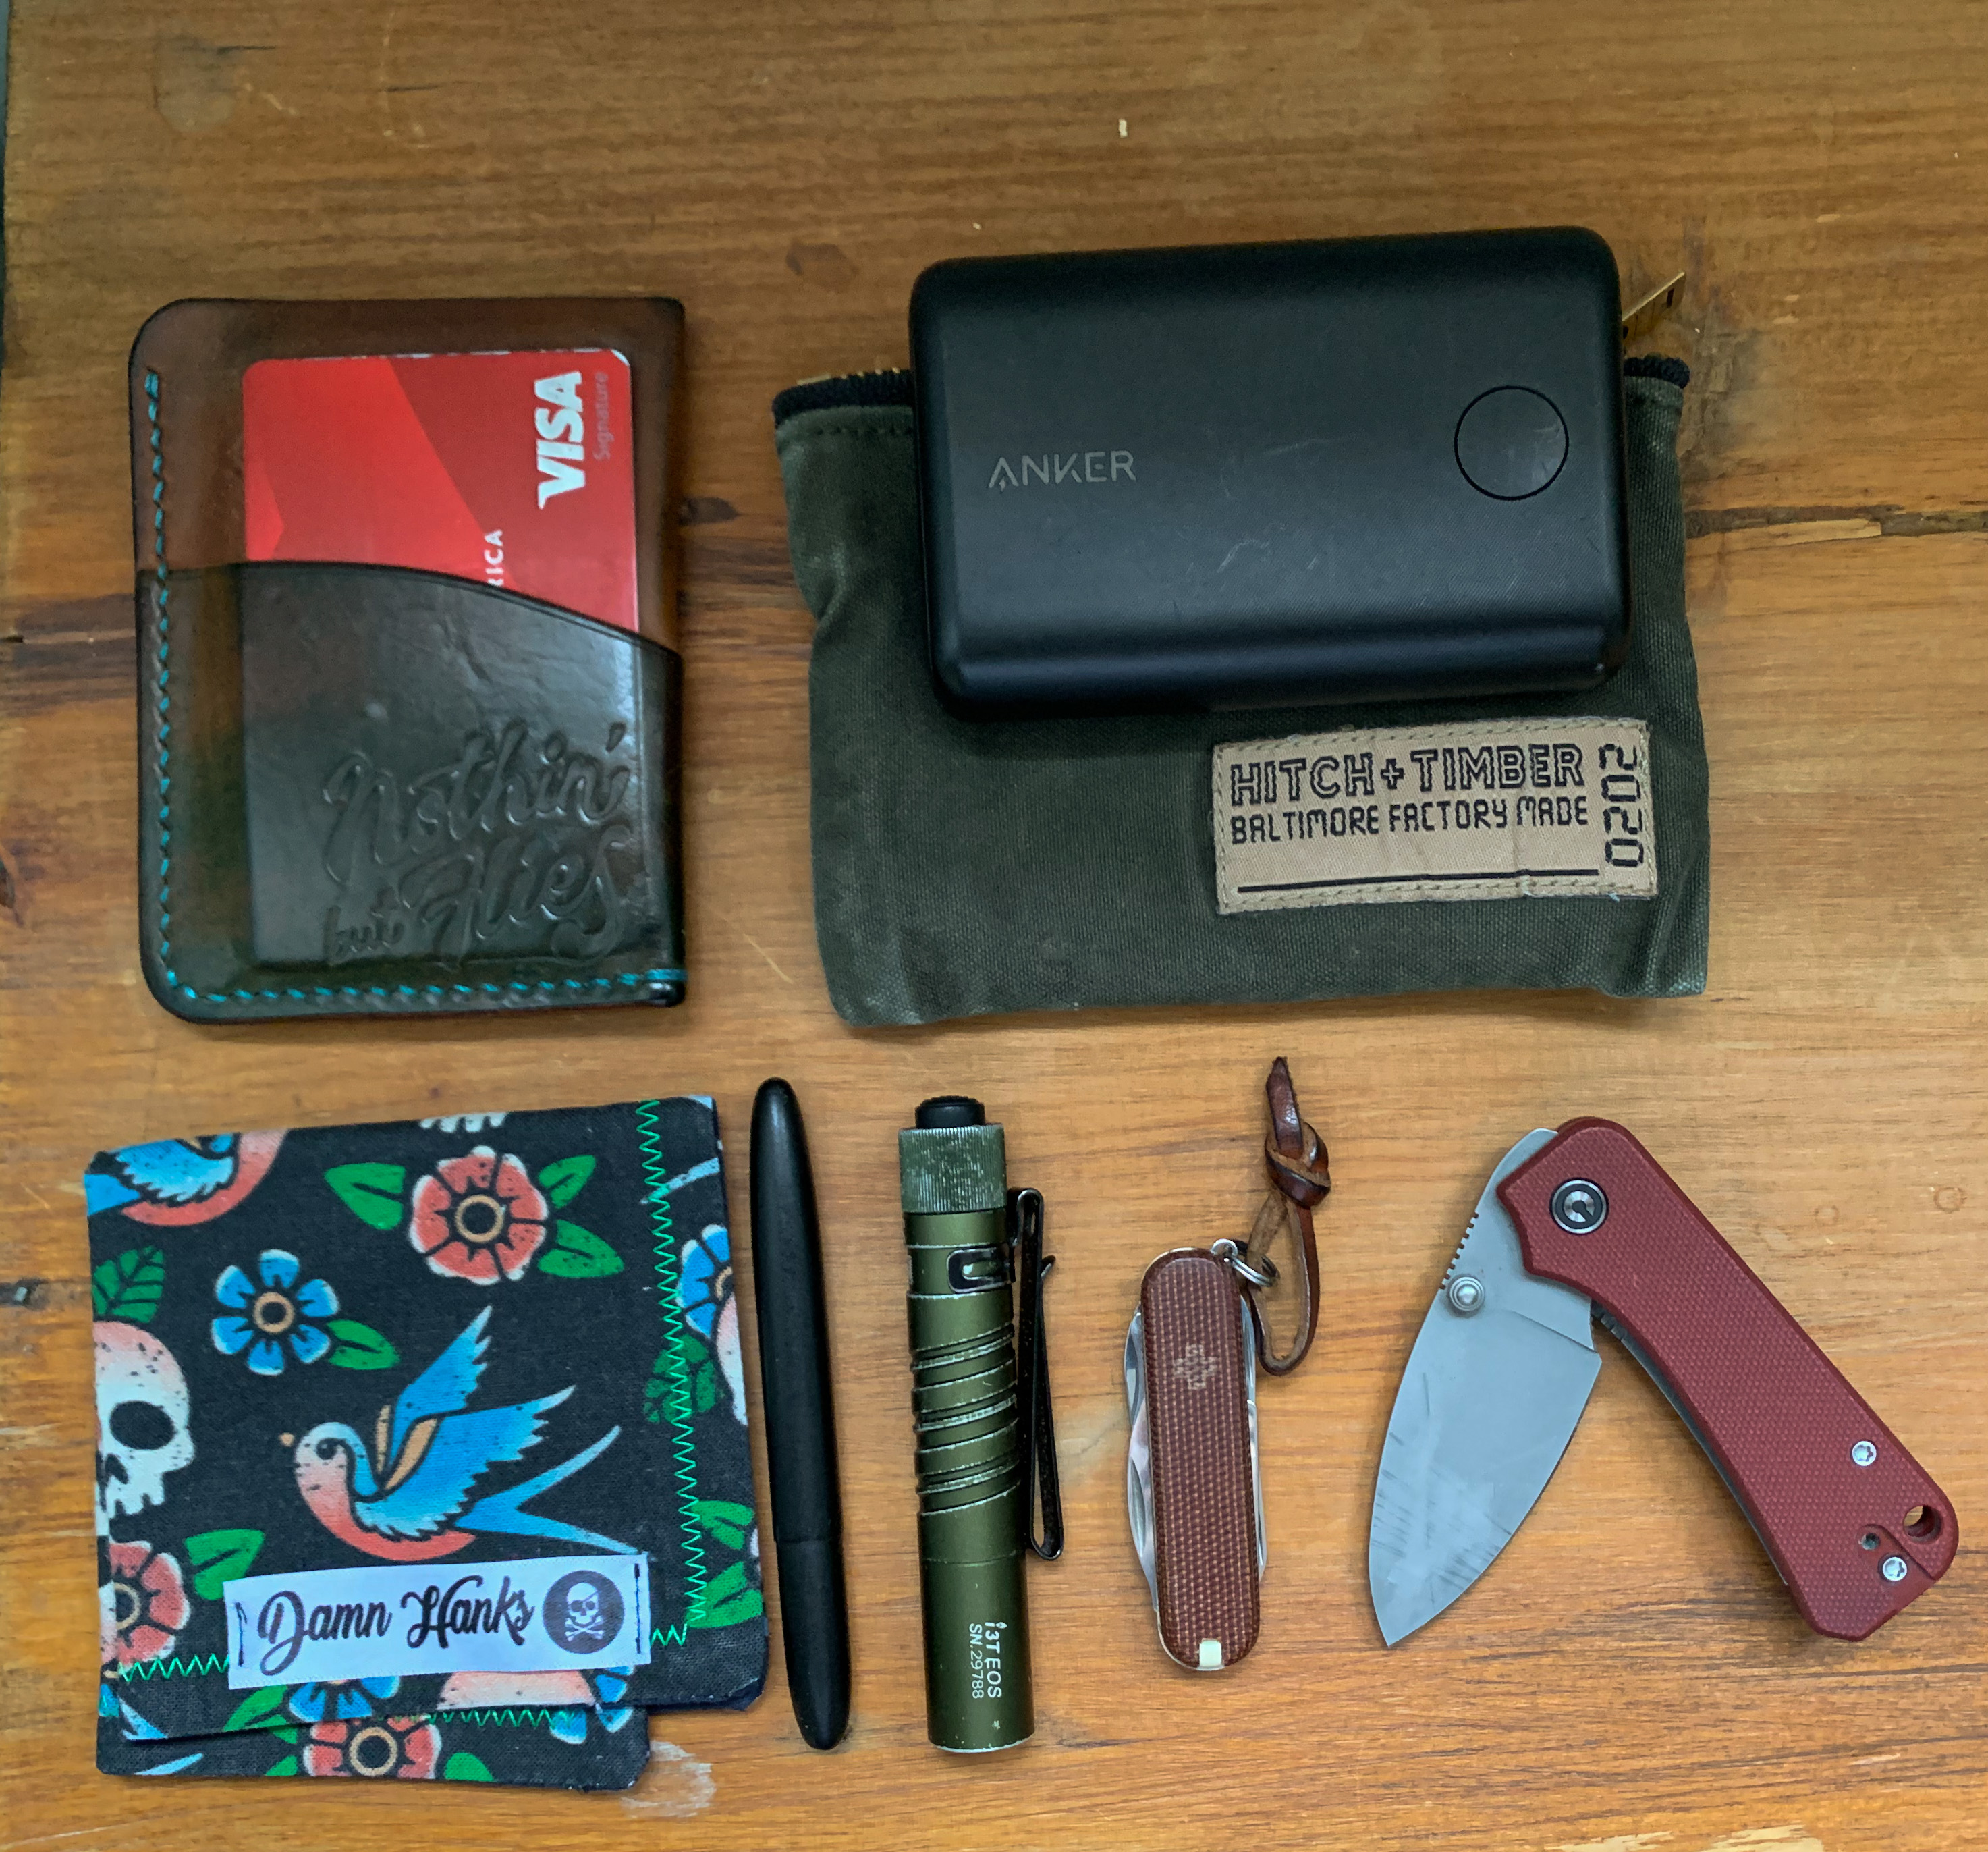 Picture of Chris’ gear including knife, multitool, pen, flashlight, backup battery, handkerchief, and wallet